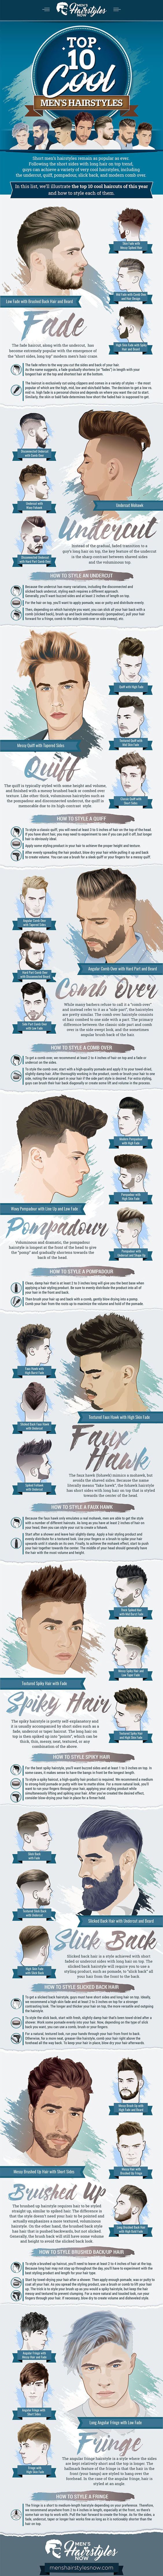 Cool Hairstyles For Men - Best Trendy and Stylish Men's Haircuts 2017